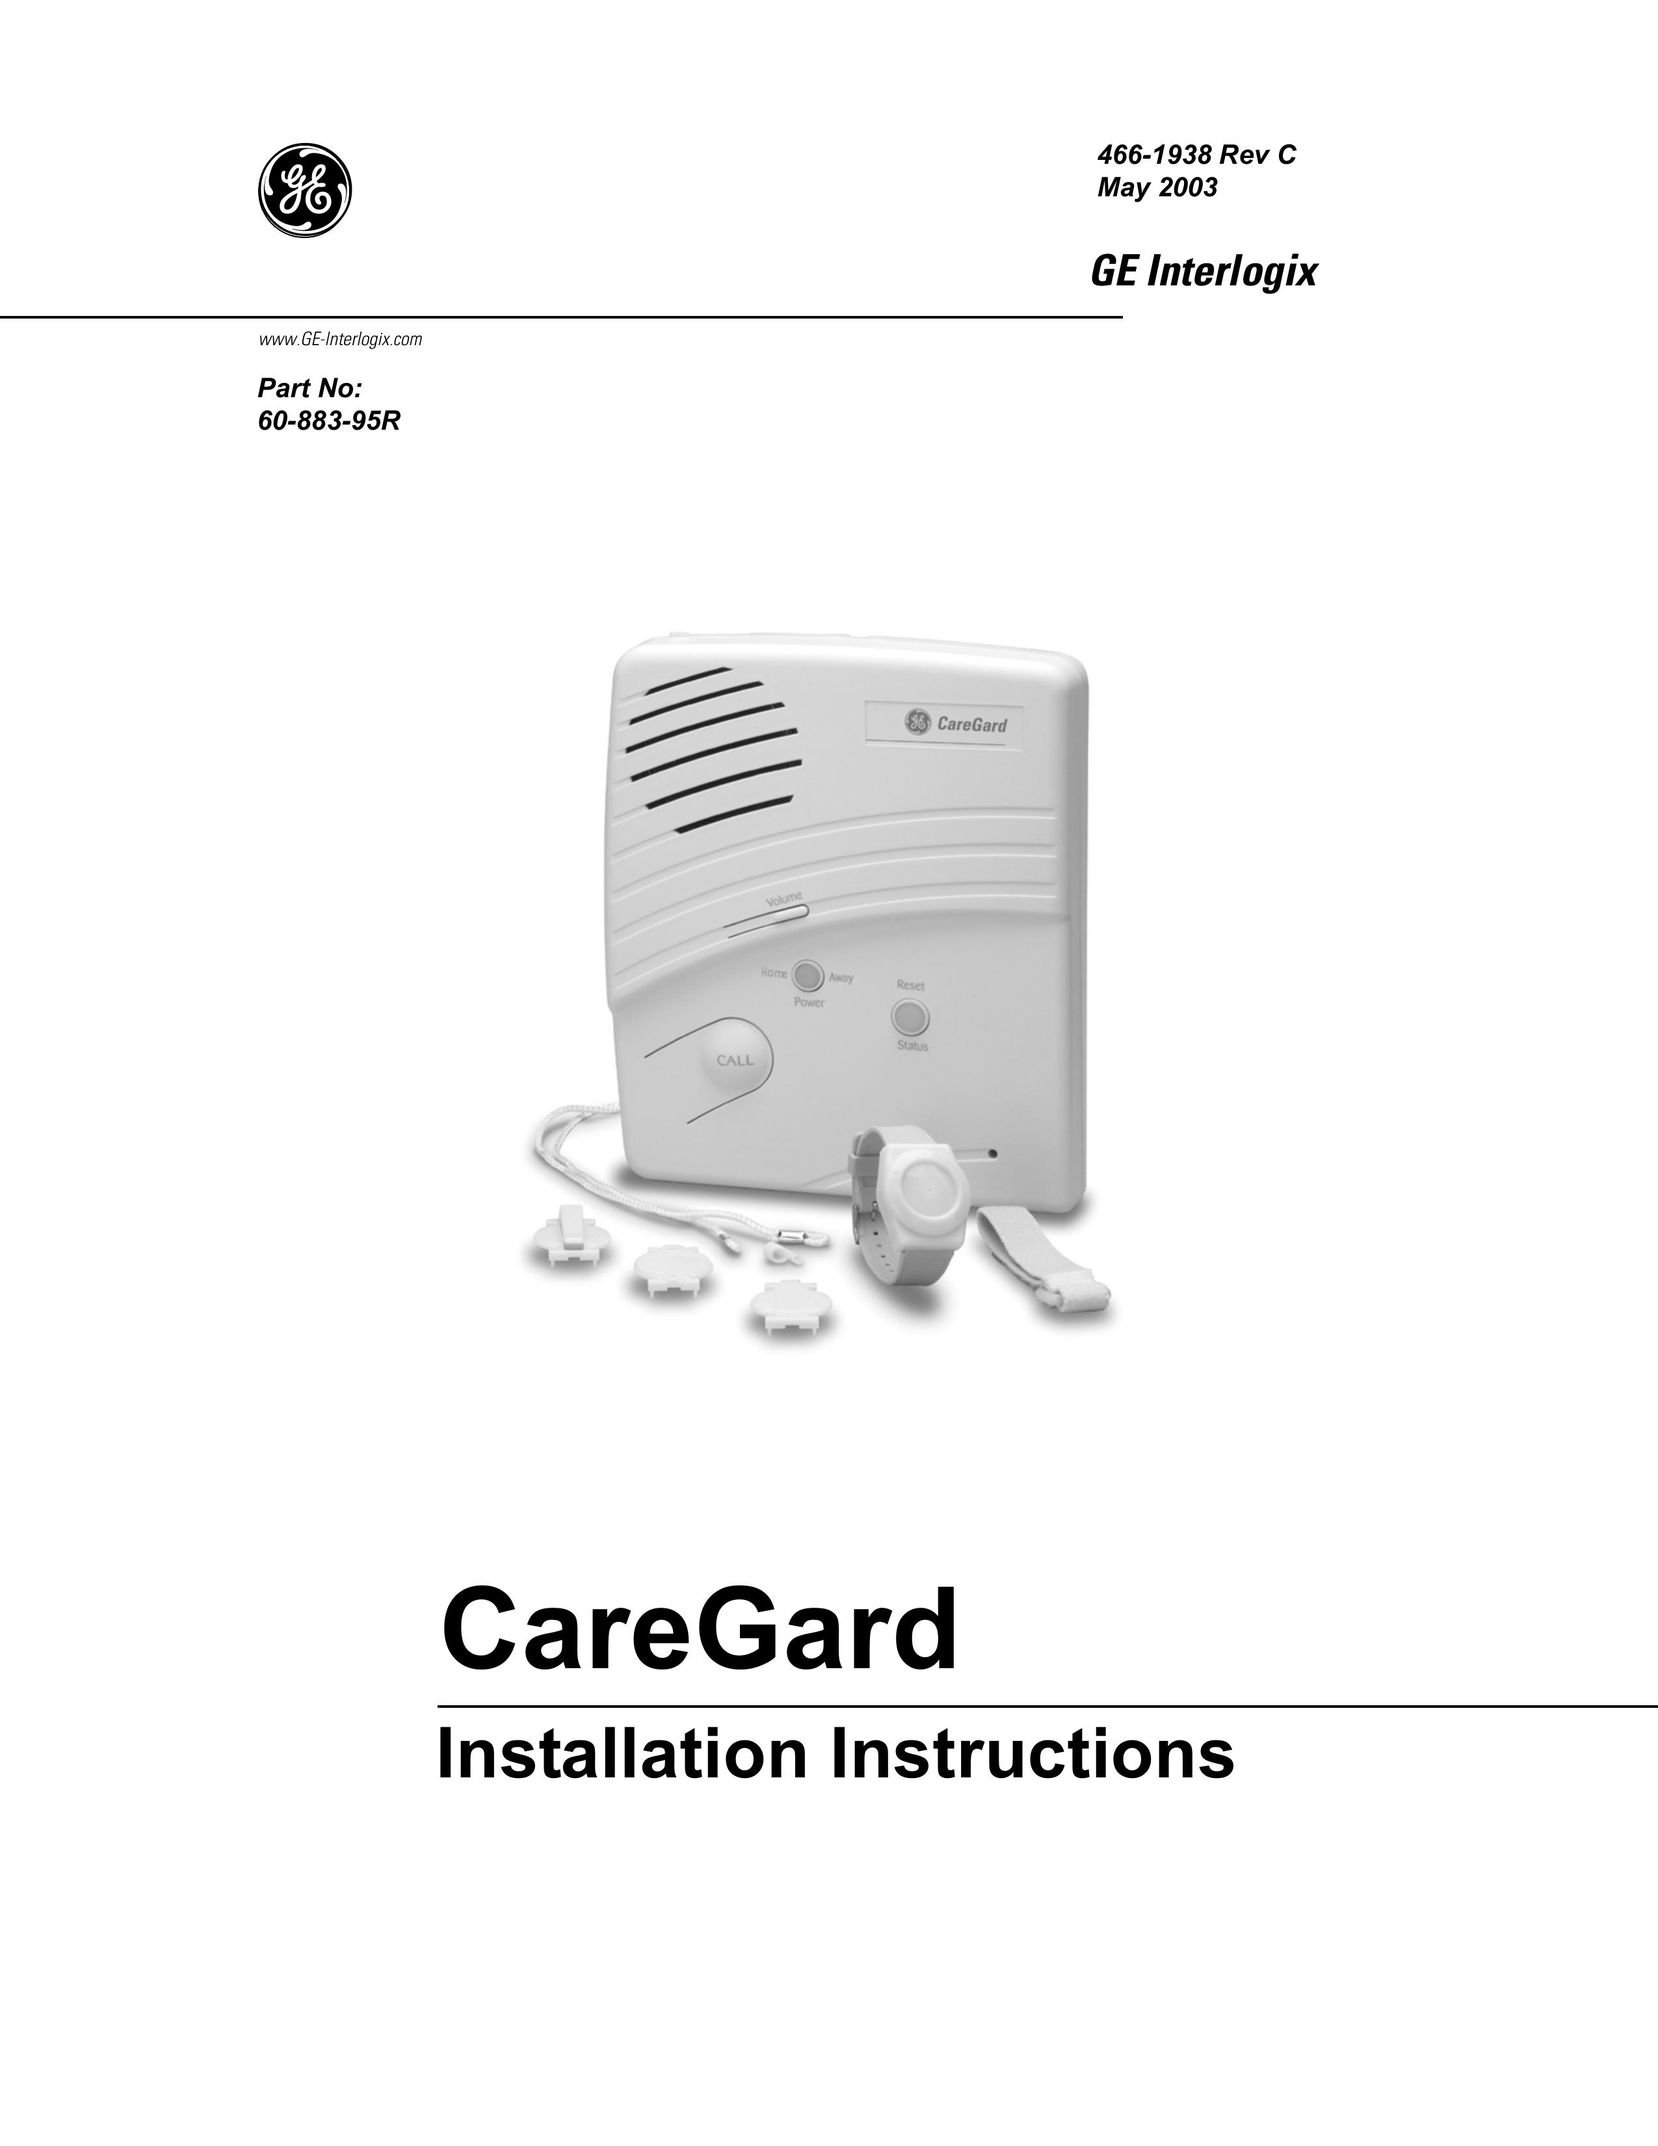 GE 60-883-95R Home Security System User Manual